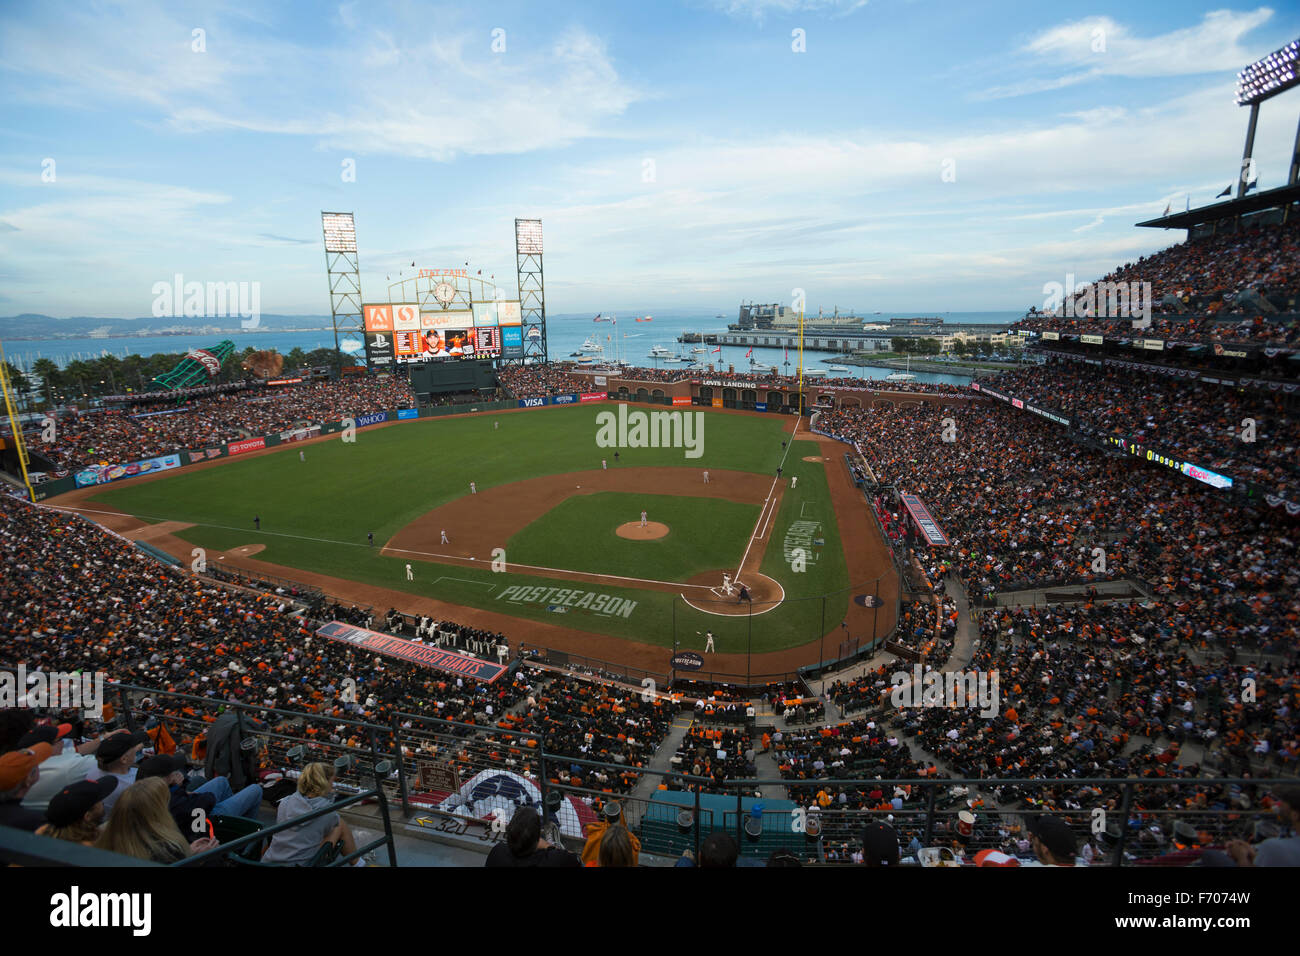 San Francisco, California, USA, October 16, 2014, AT&T Park, baseball stadium, SF Giants versus St. Louis Cardinals, National League Championship Series (NLCS), crowd watches game elevated view Stock Photo